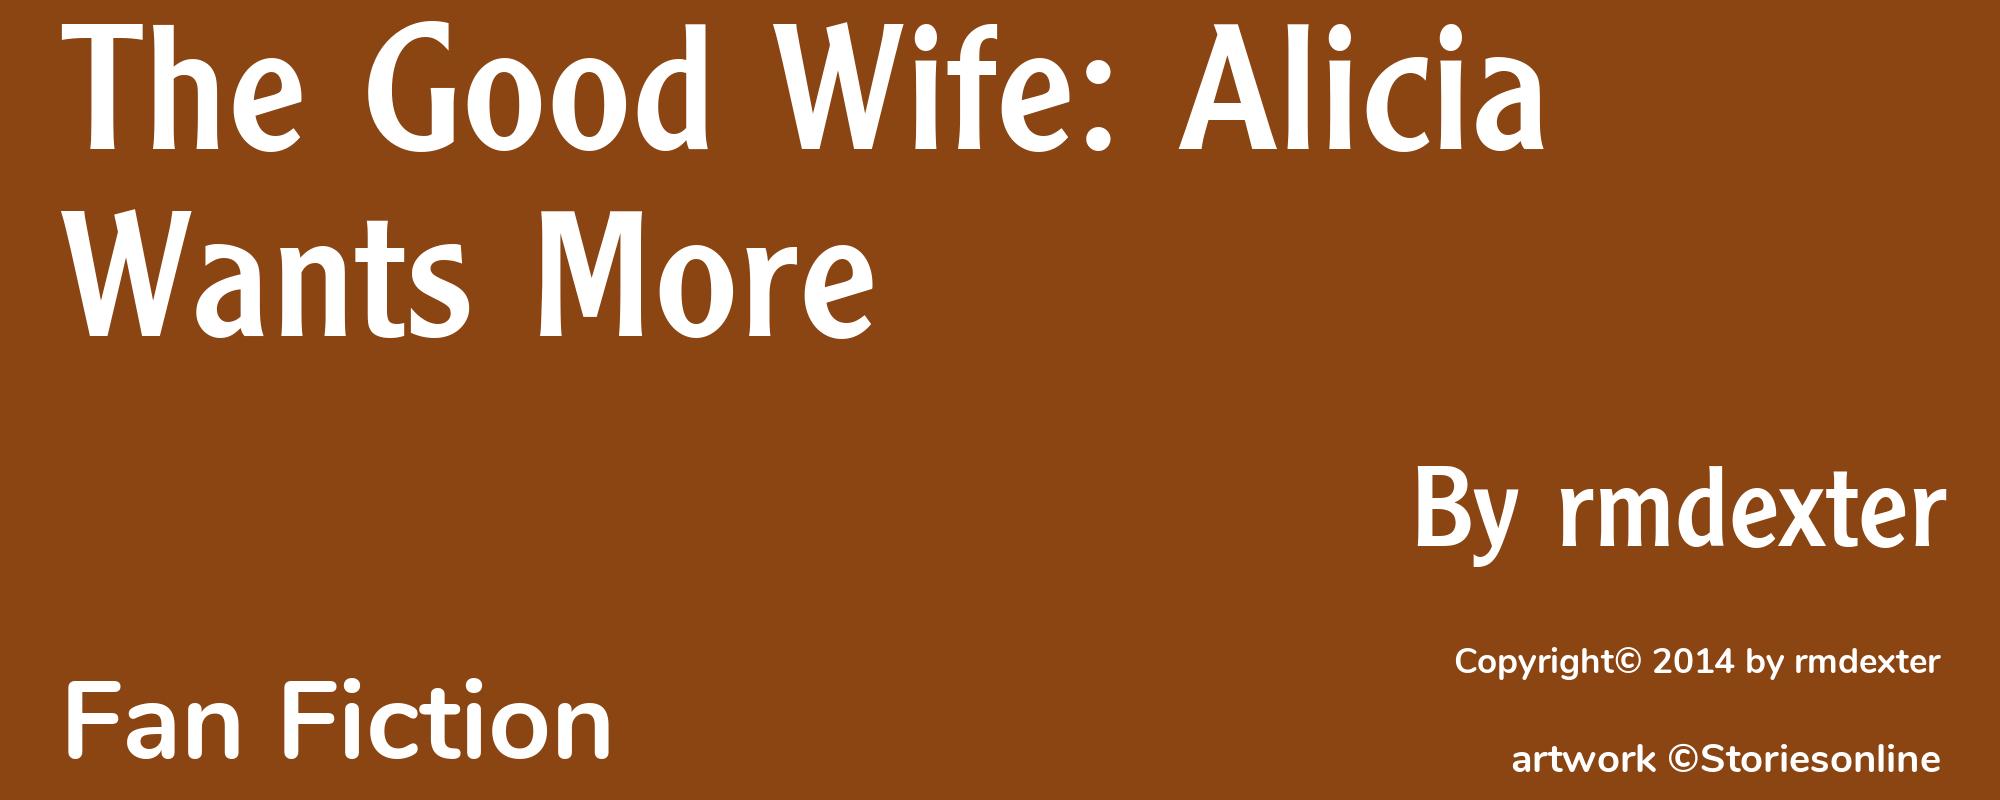 The Good Wife: Alicia Wants More - Cover